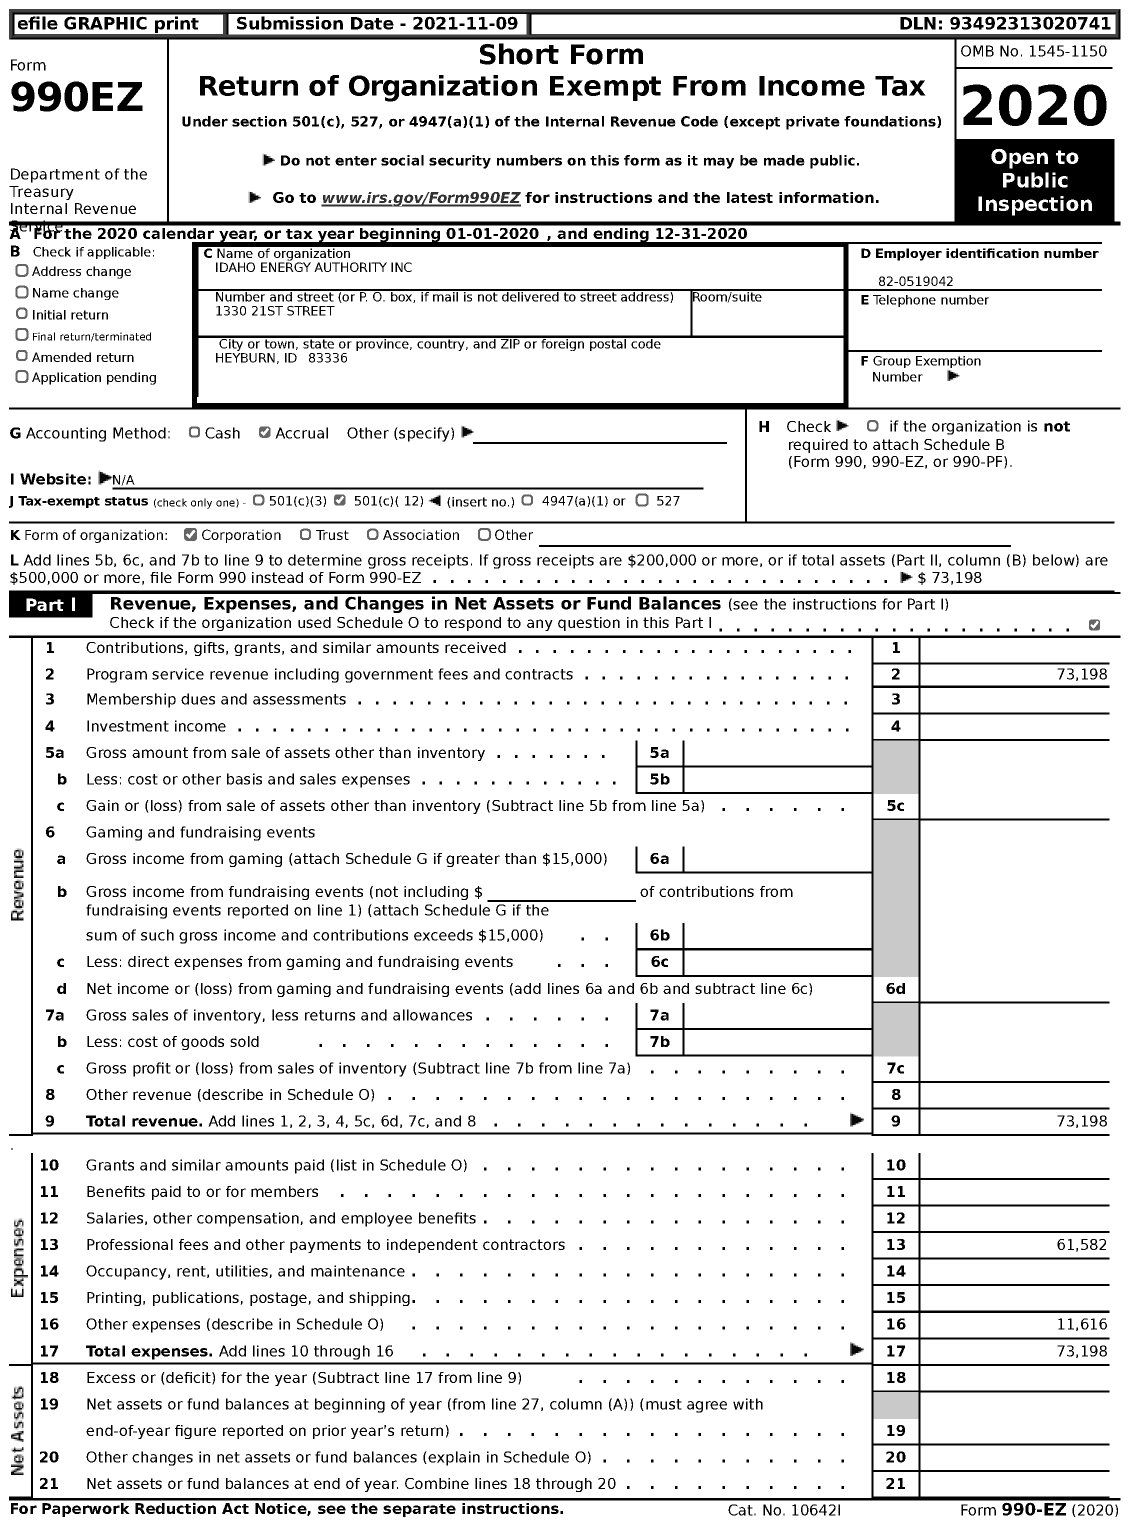 Image of first page of 2020 Form 990EZ for Idaho Energy Authority